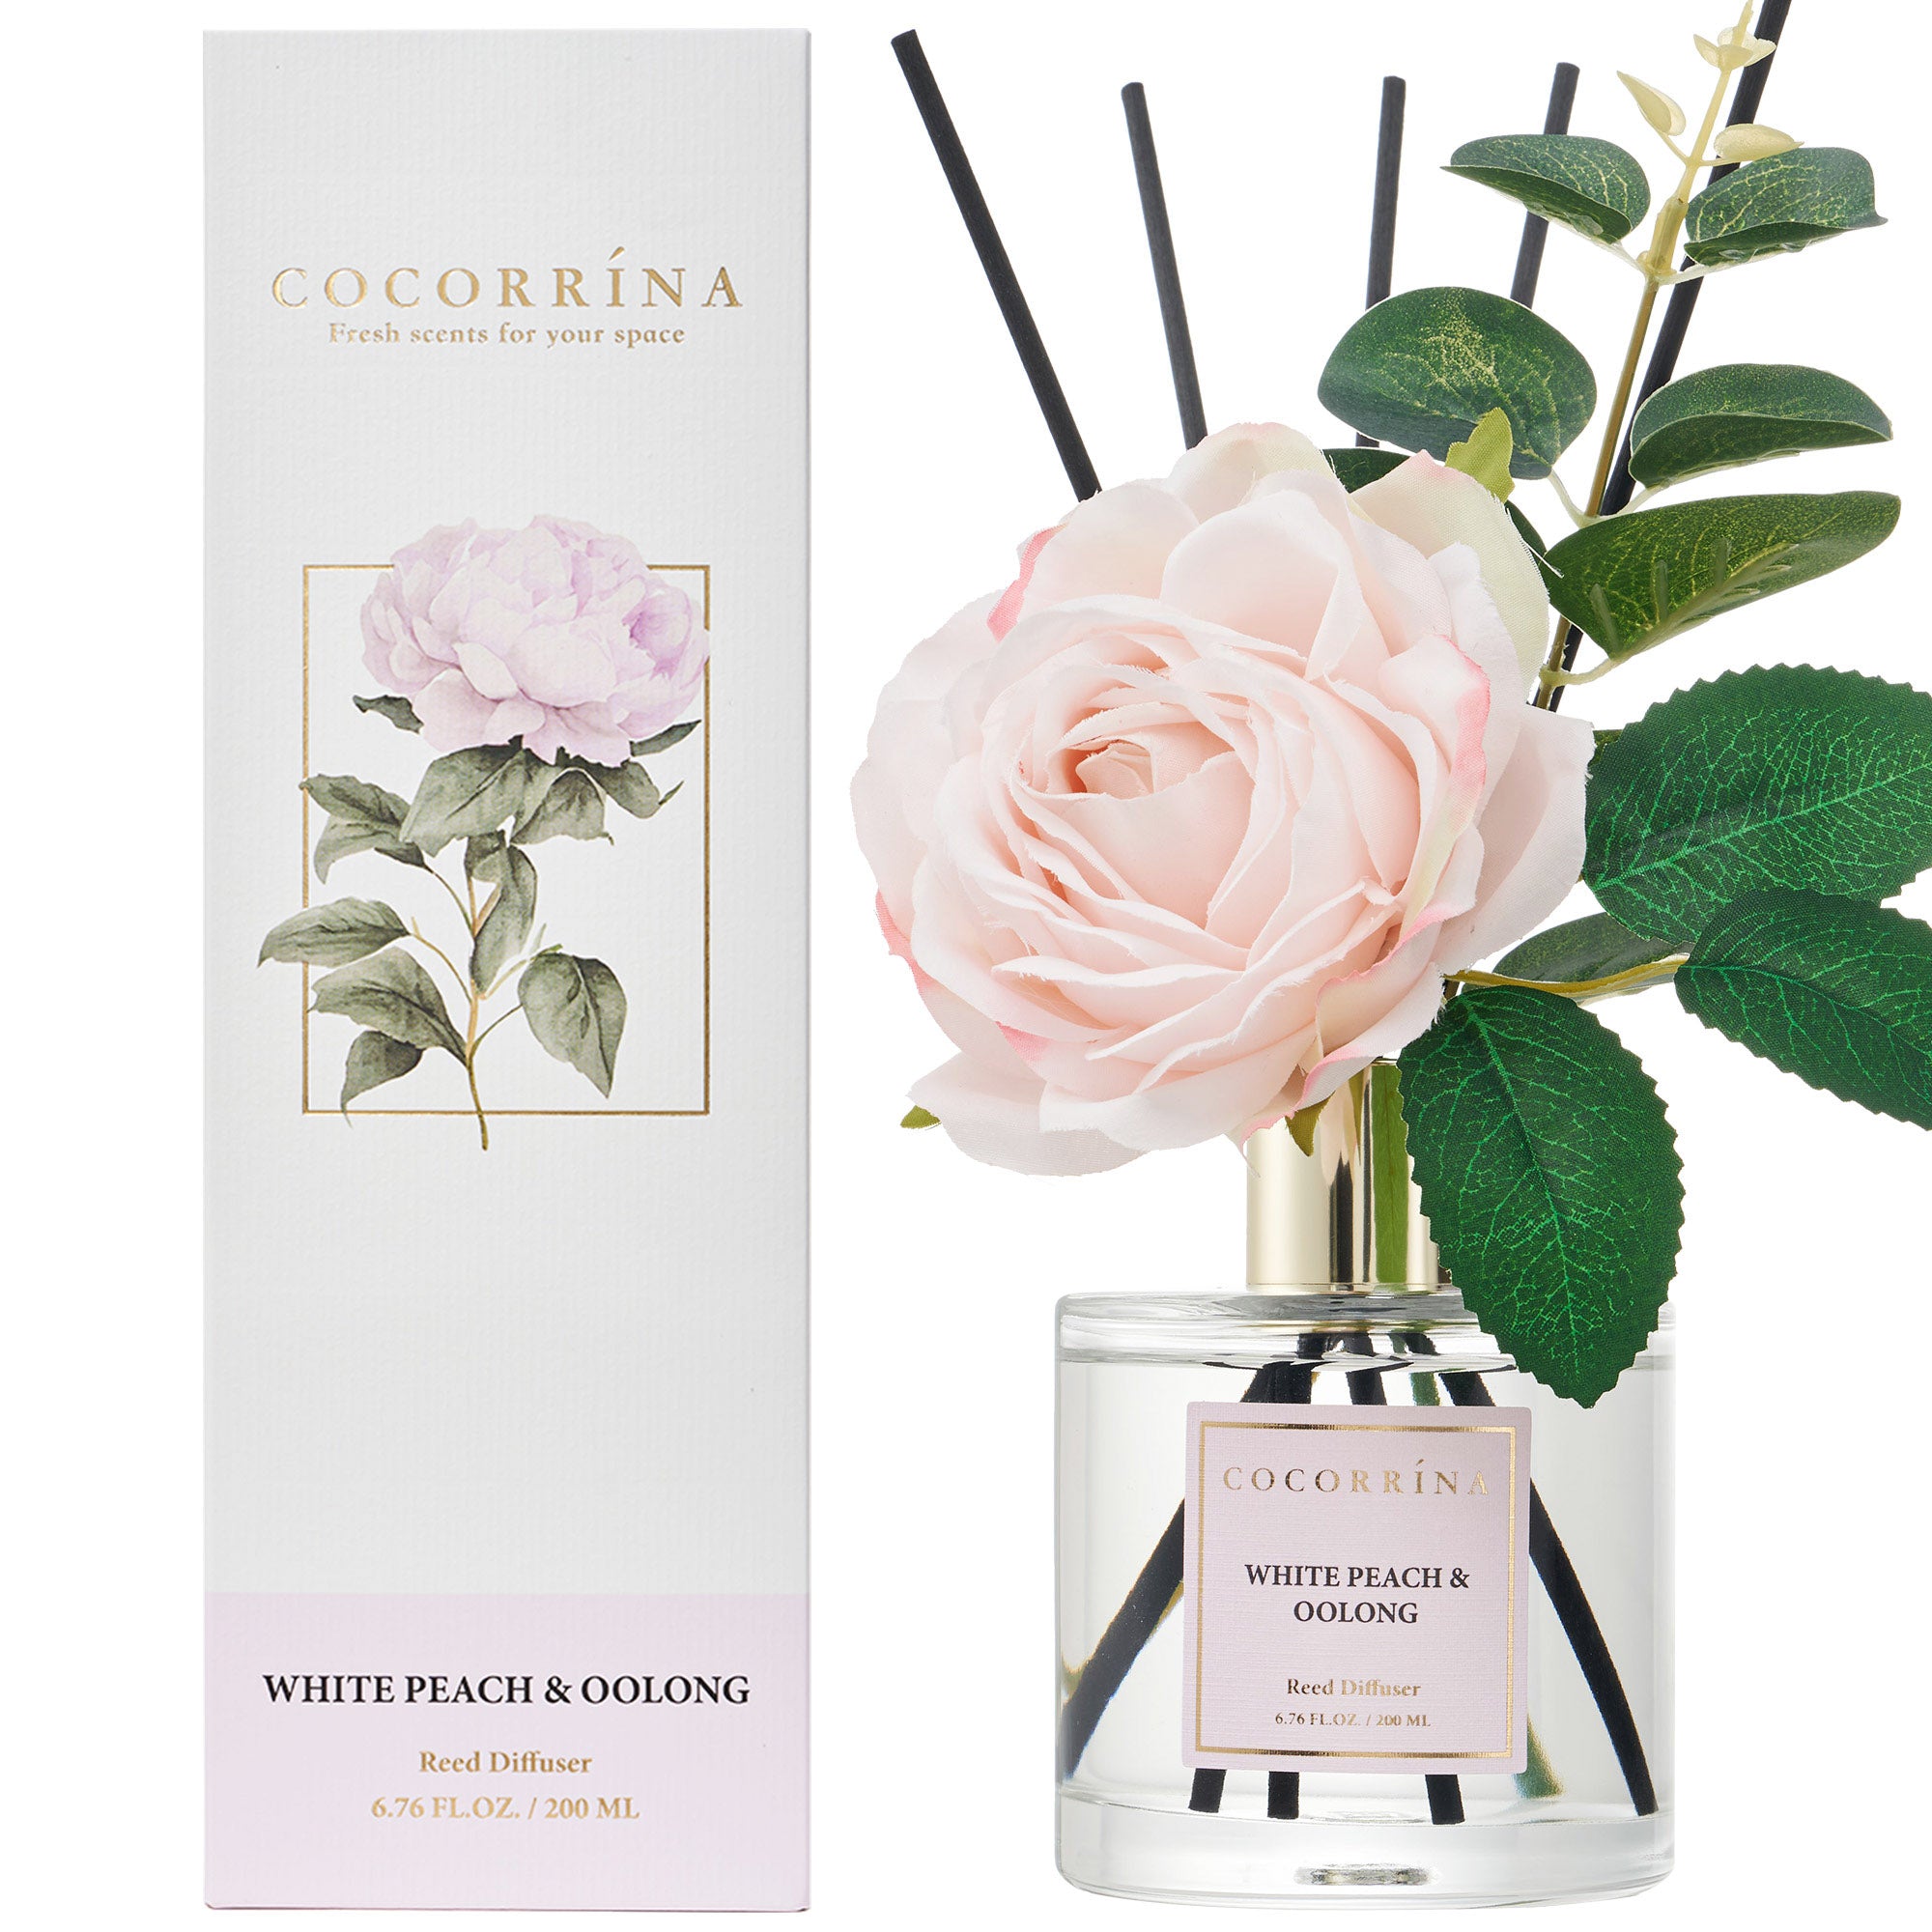 COCORRÍNA White Peach& Oolong Flower Reed Diffuser